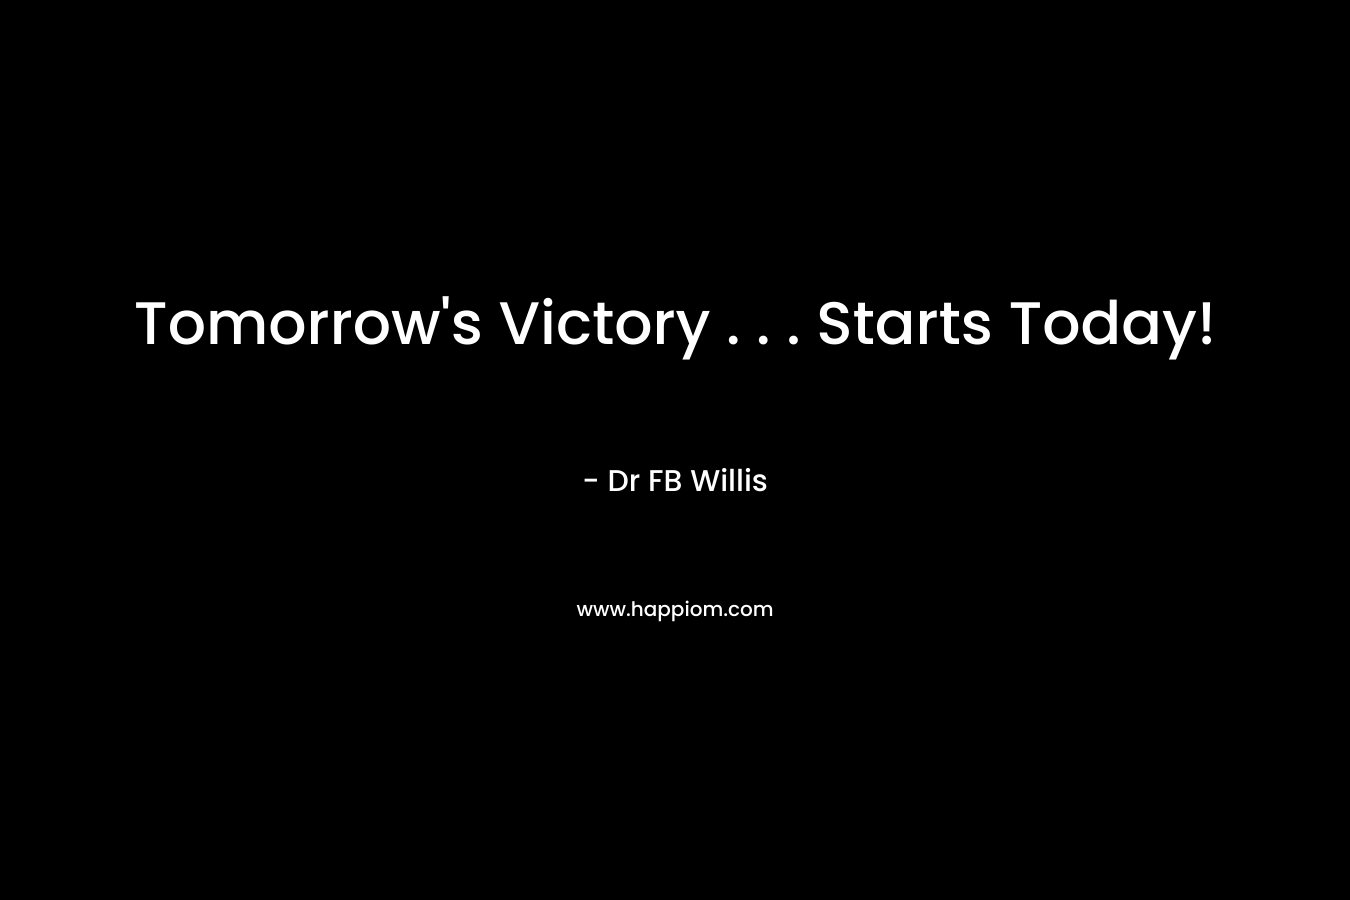 Tomorrow's Victory . . . Starts Today!